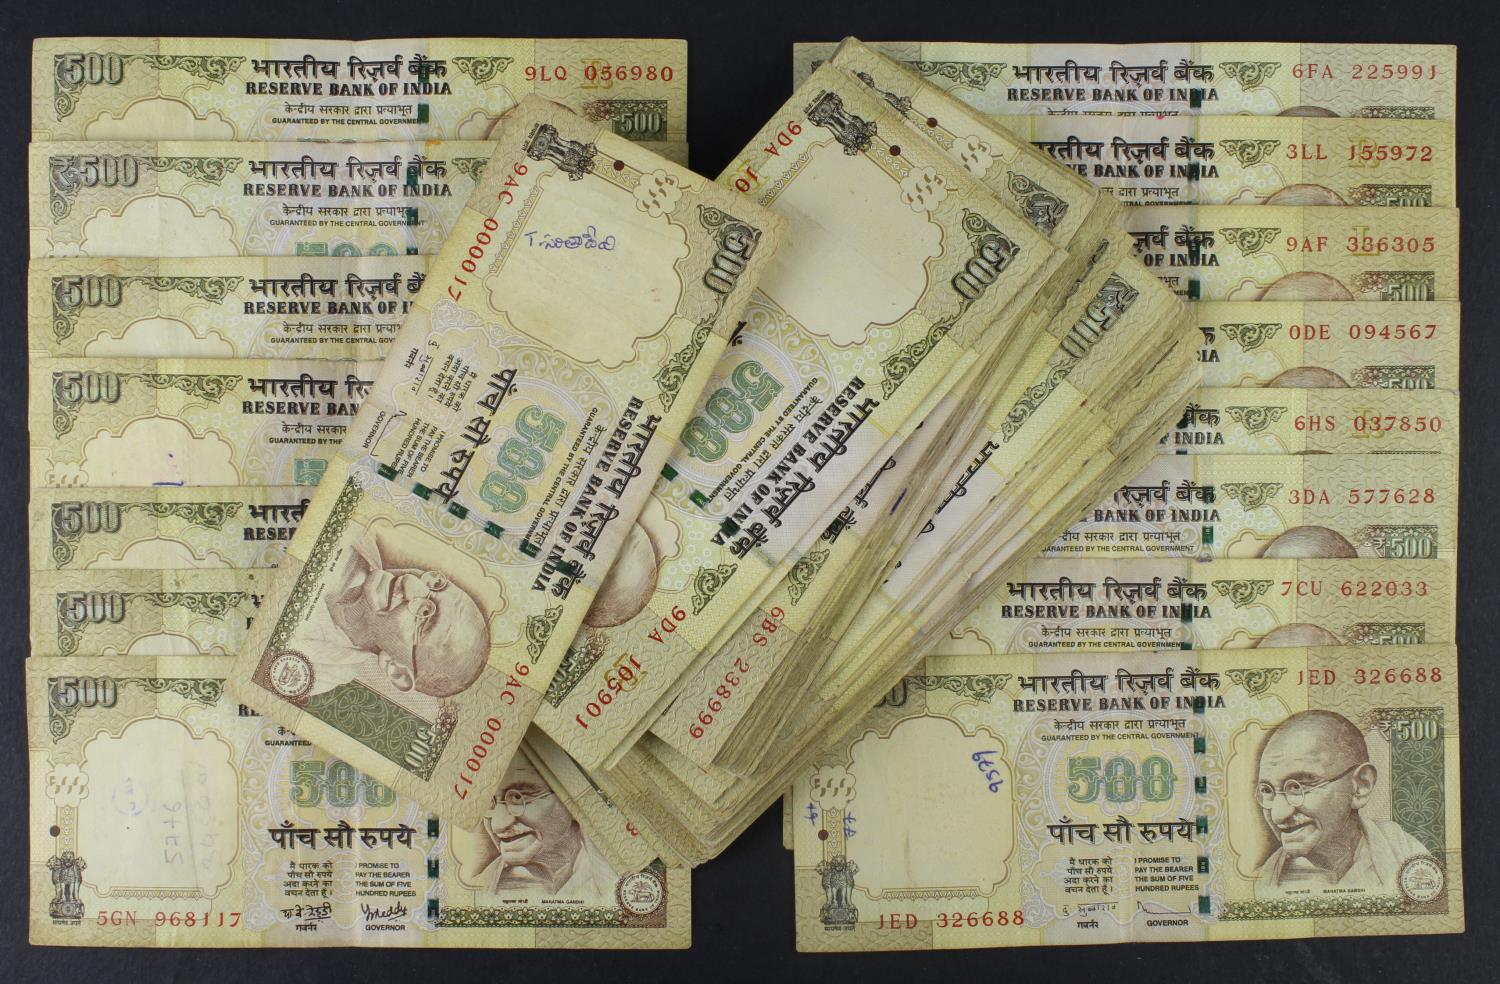 India 500 Rupees (100) dated 2000 - 2015 (Pick93, Pick99 and Pick106) mixed grades